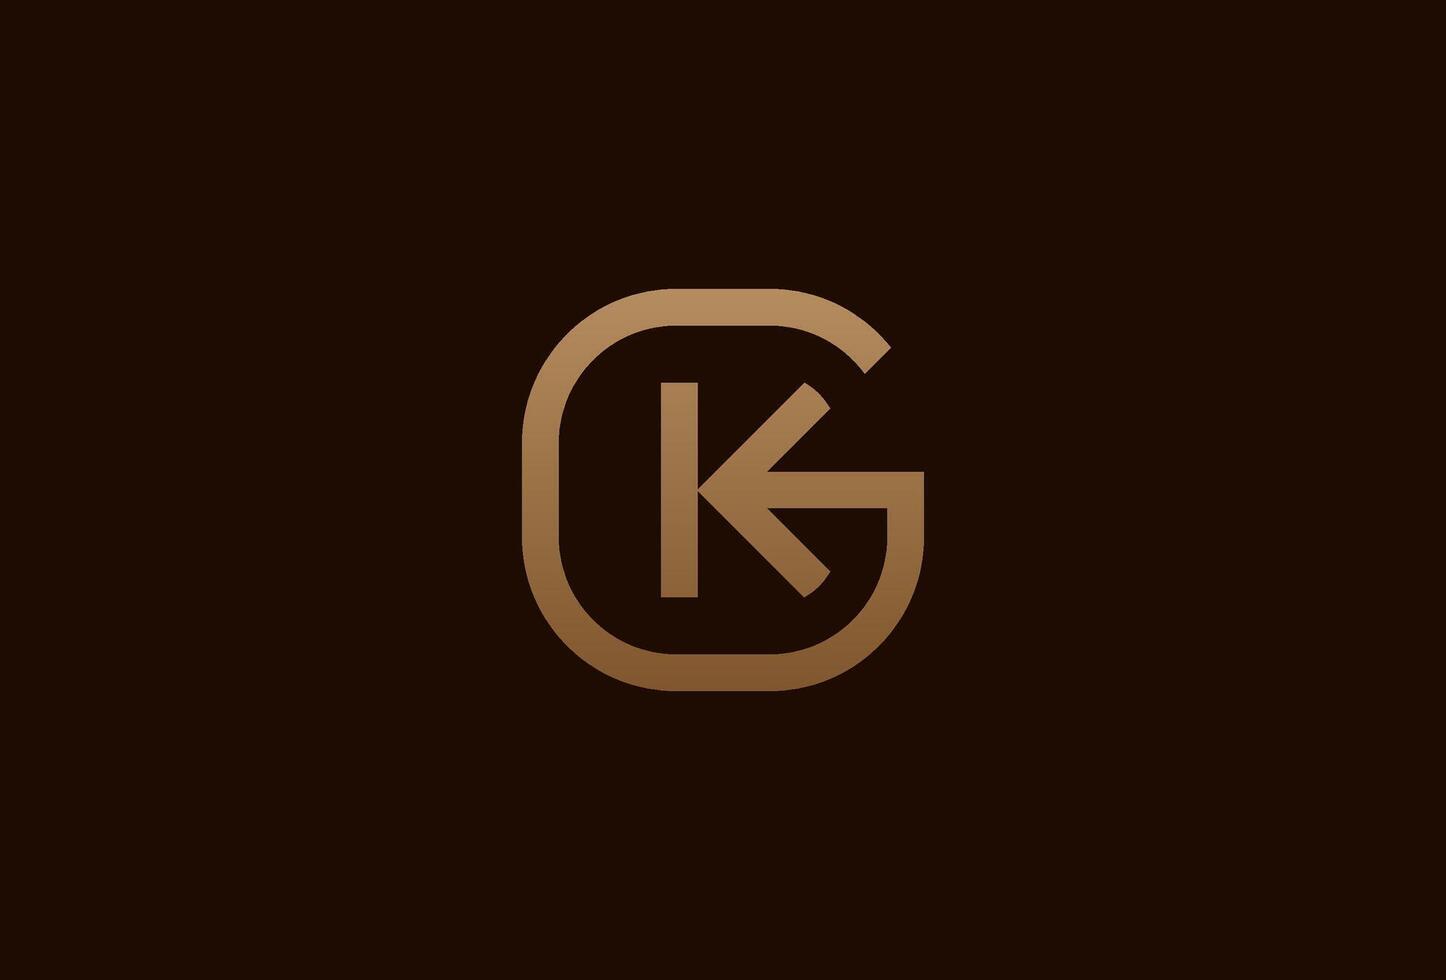 initial GK or KG logo, monogram logo design combination of letters G and K in gold color, usable for brand and business logos, flat design logo template element, illustration vector